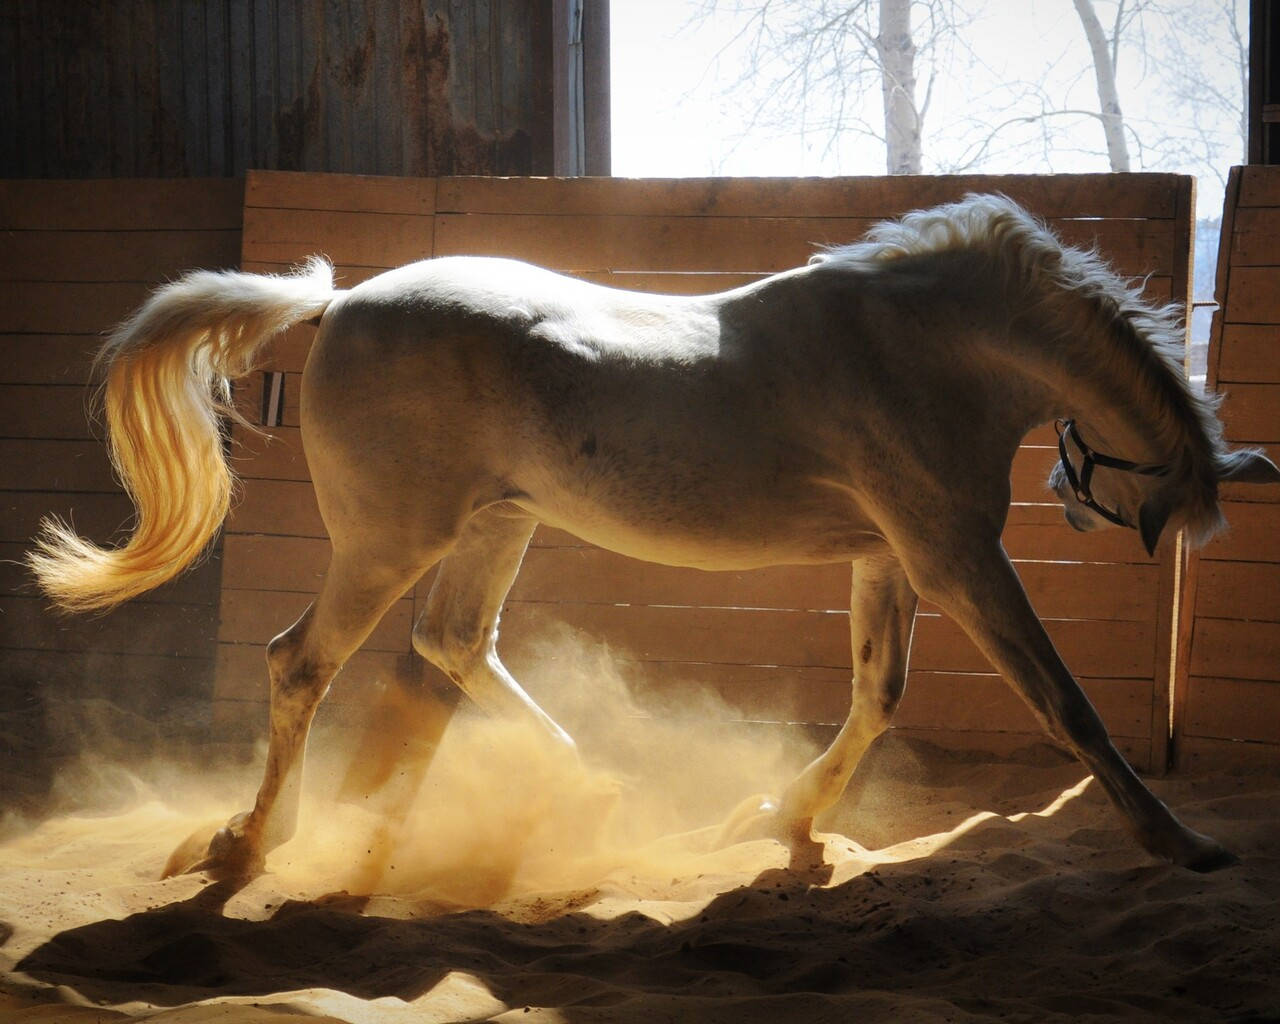 Dusty White Horse In Stable Background